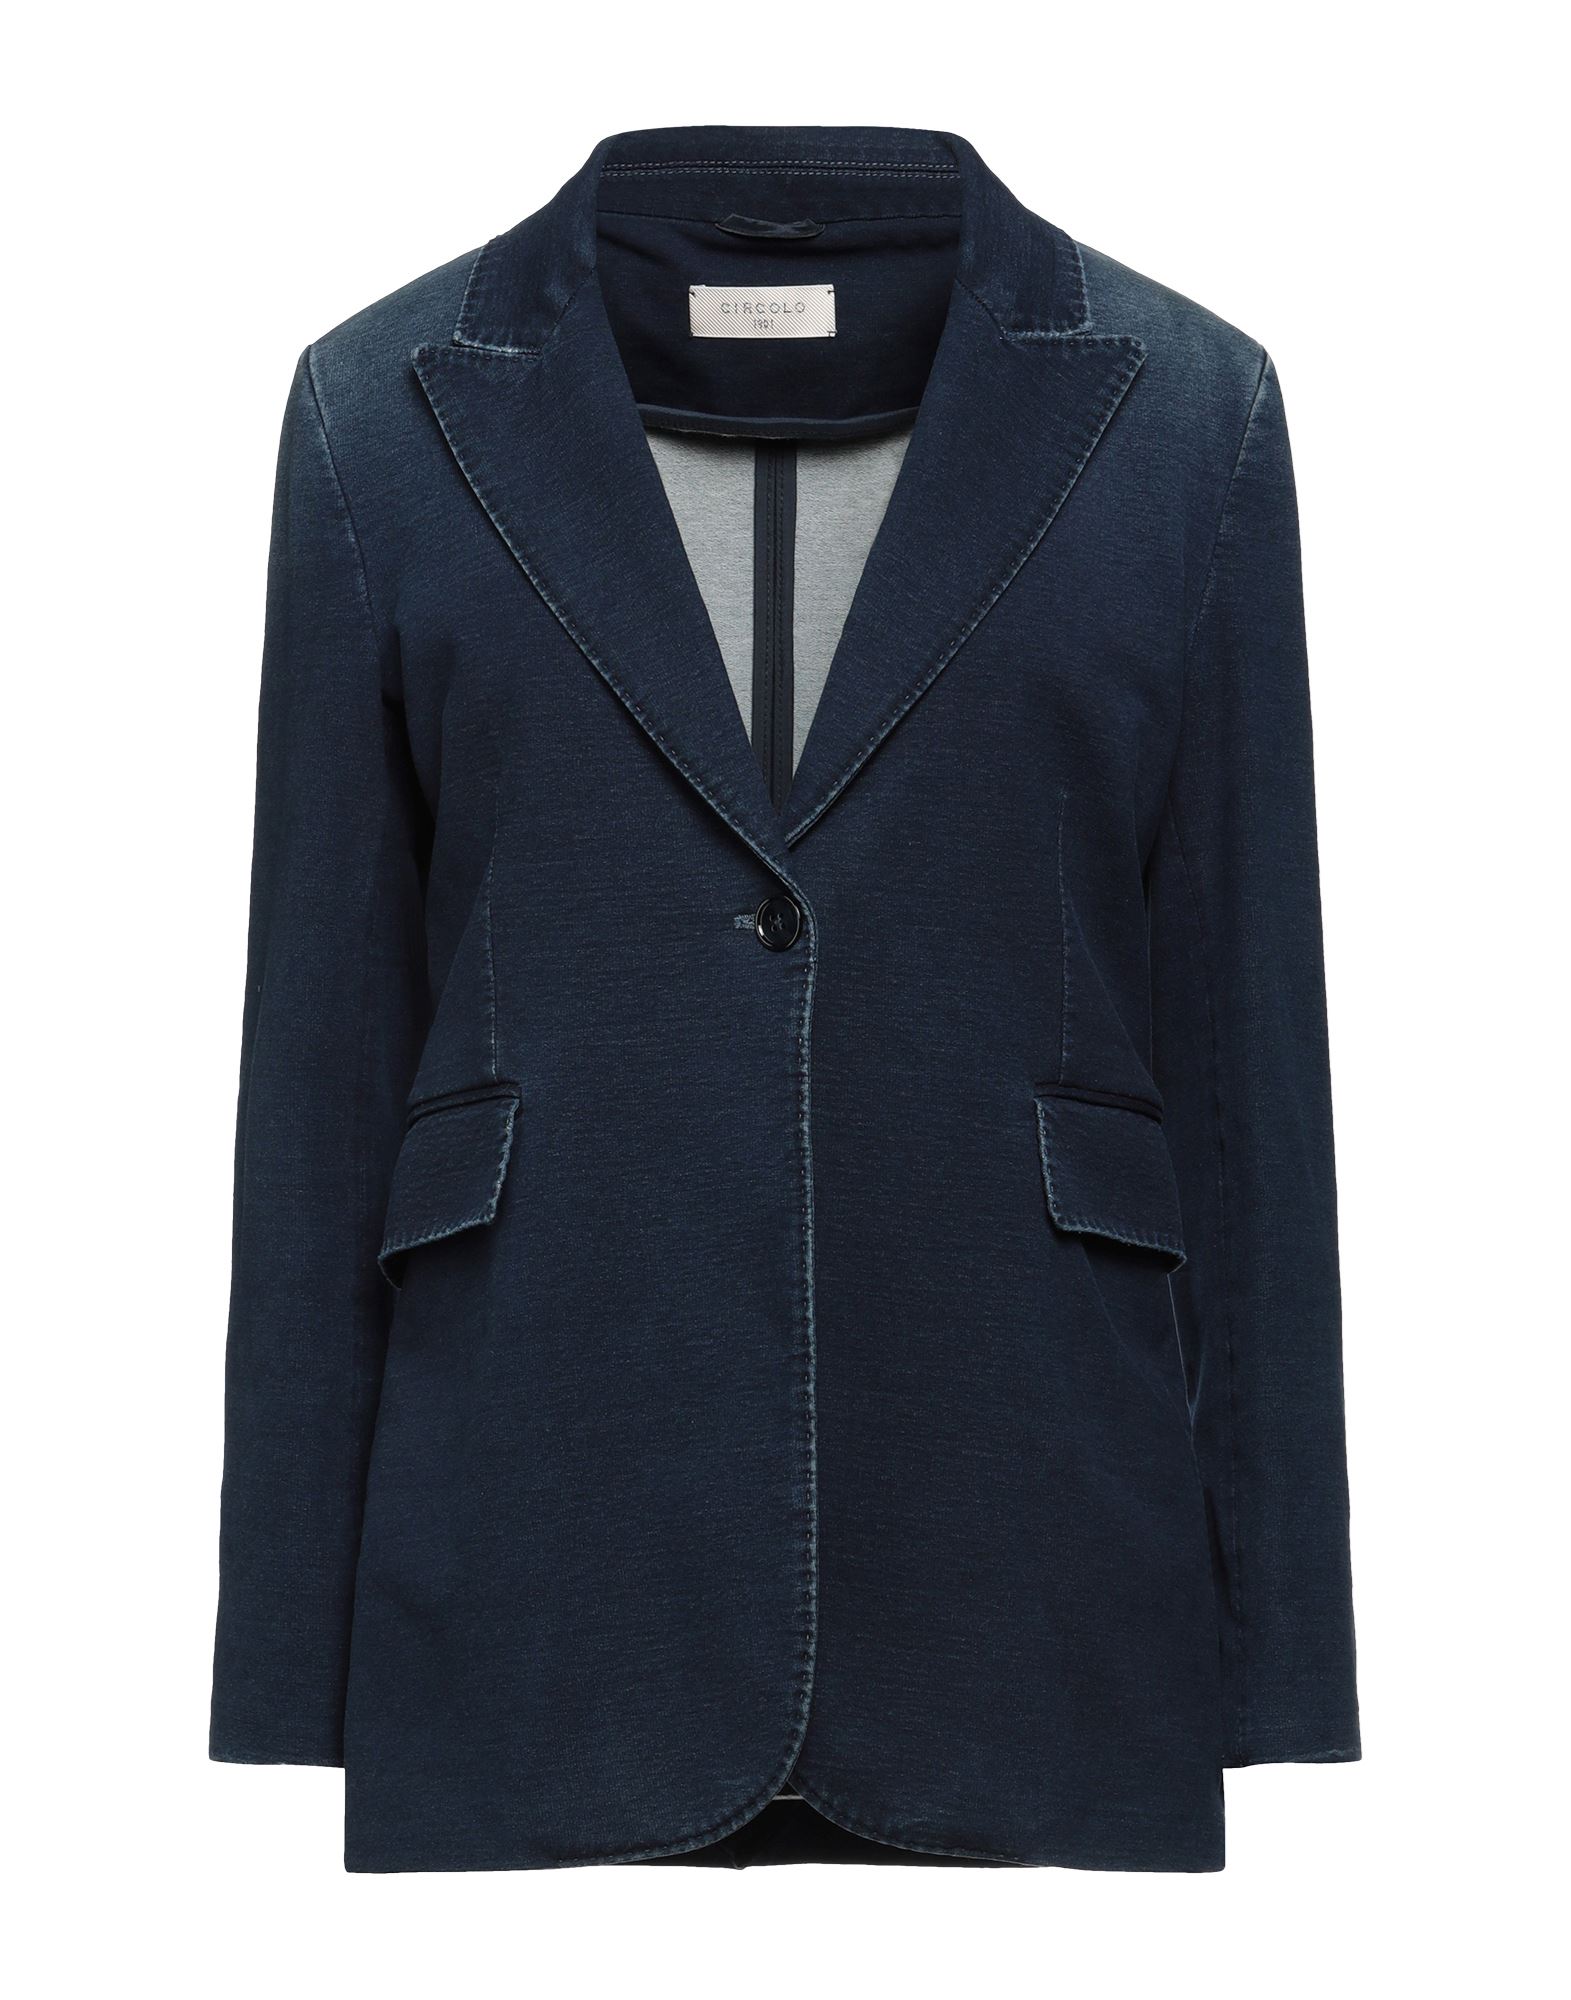 Circolo 1901 Suit Jackets In Navy Blue